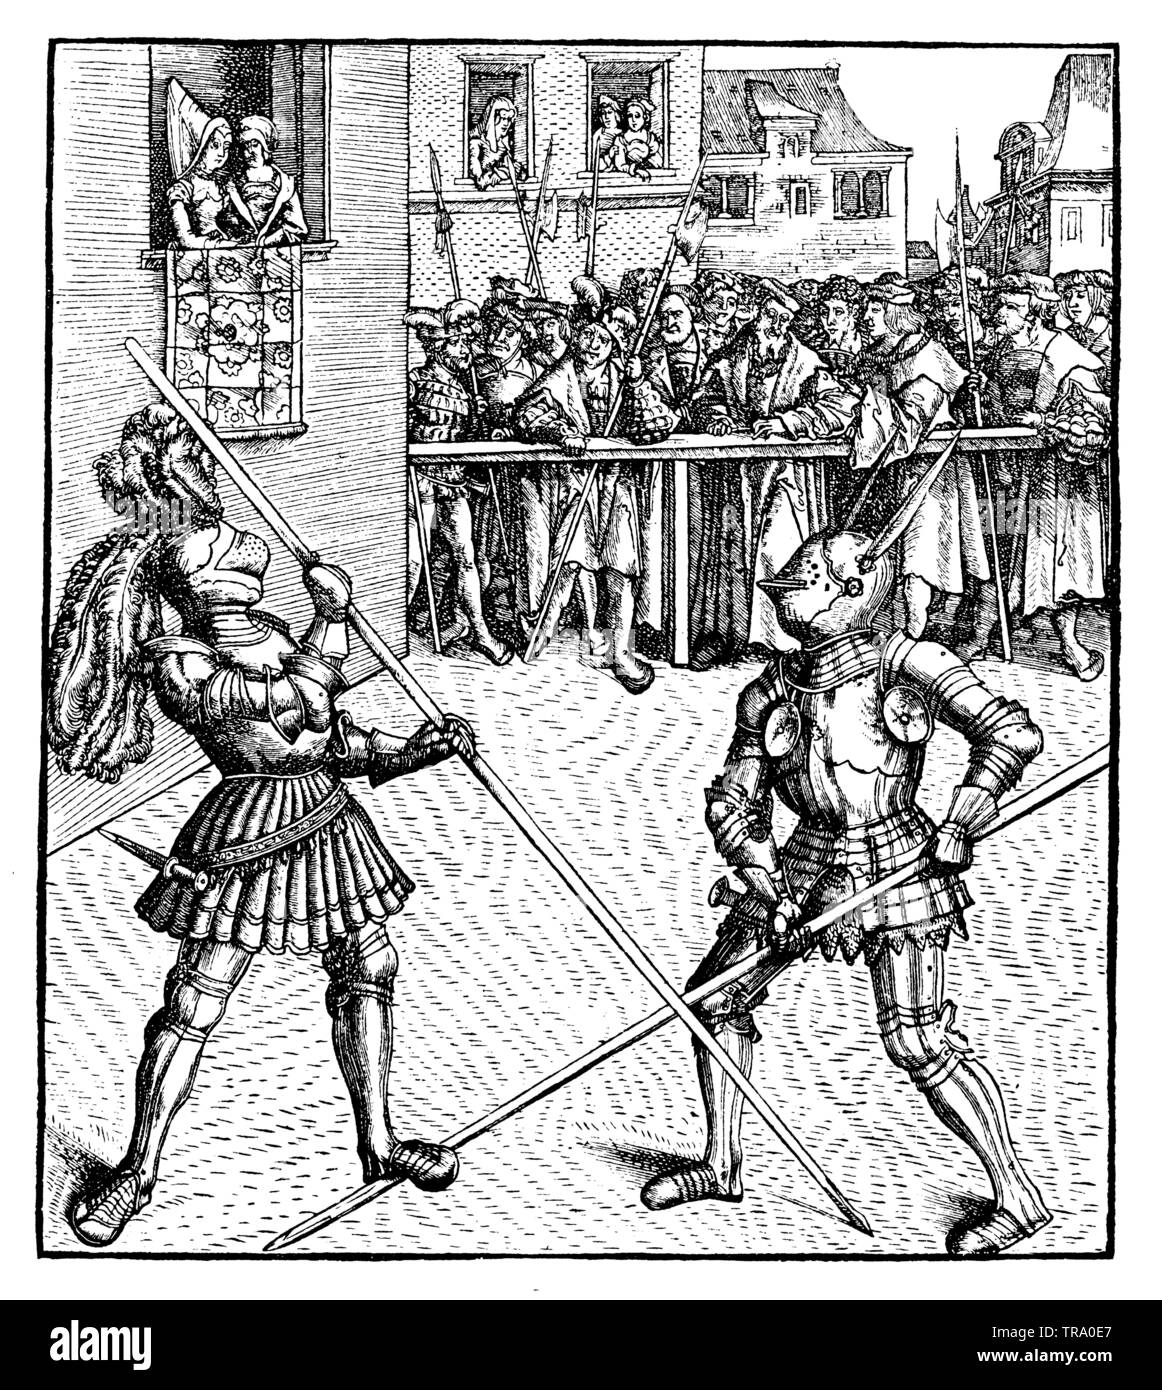 Maximilian in the lancet tournament on foot. Facsimile of a woodcut in 'Weißkunig'; illustrated by Hans Burgkmair (1473 - 1531)', , Hans Burgkmair der Ältere (1473-1531) (cultural history book, 1893) Stock Photo